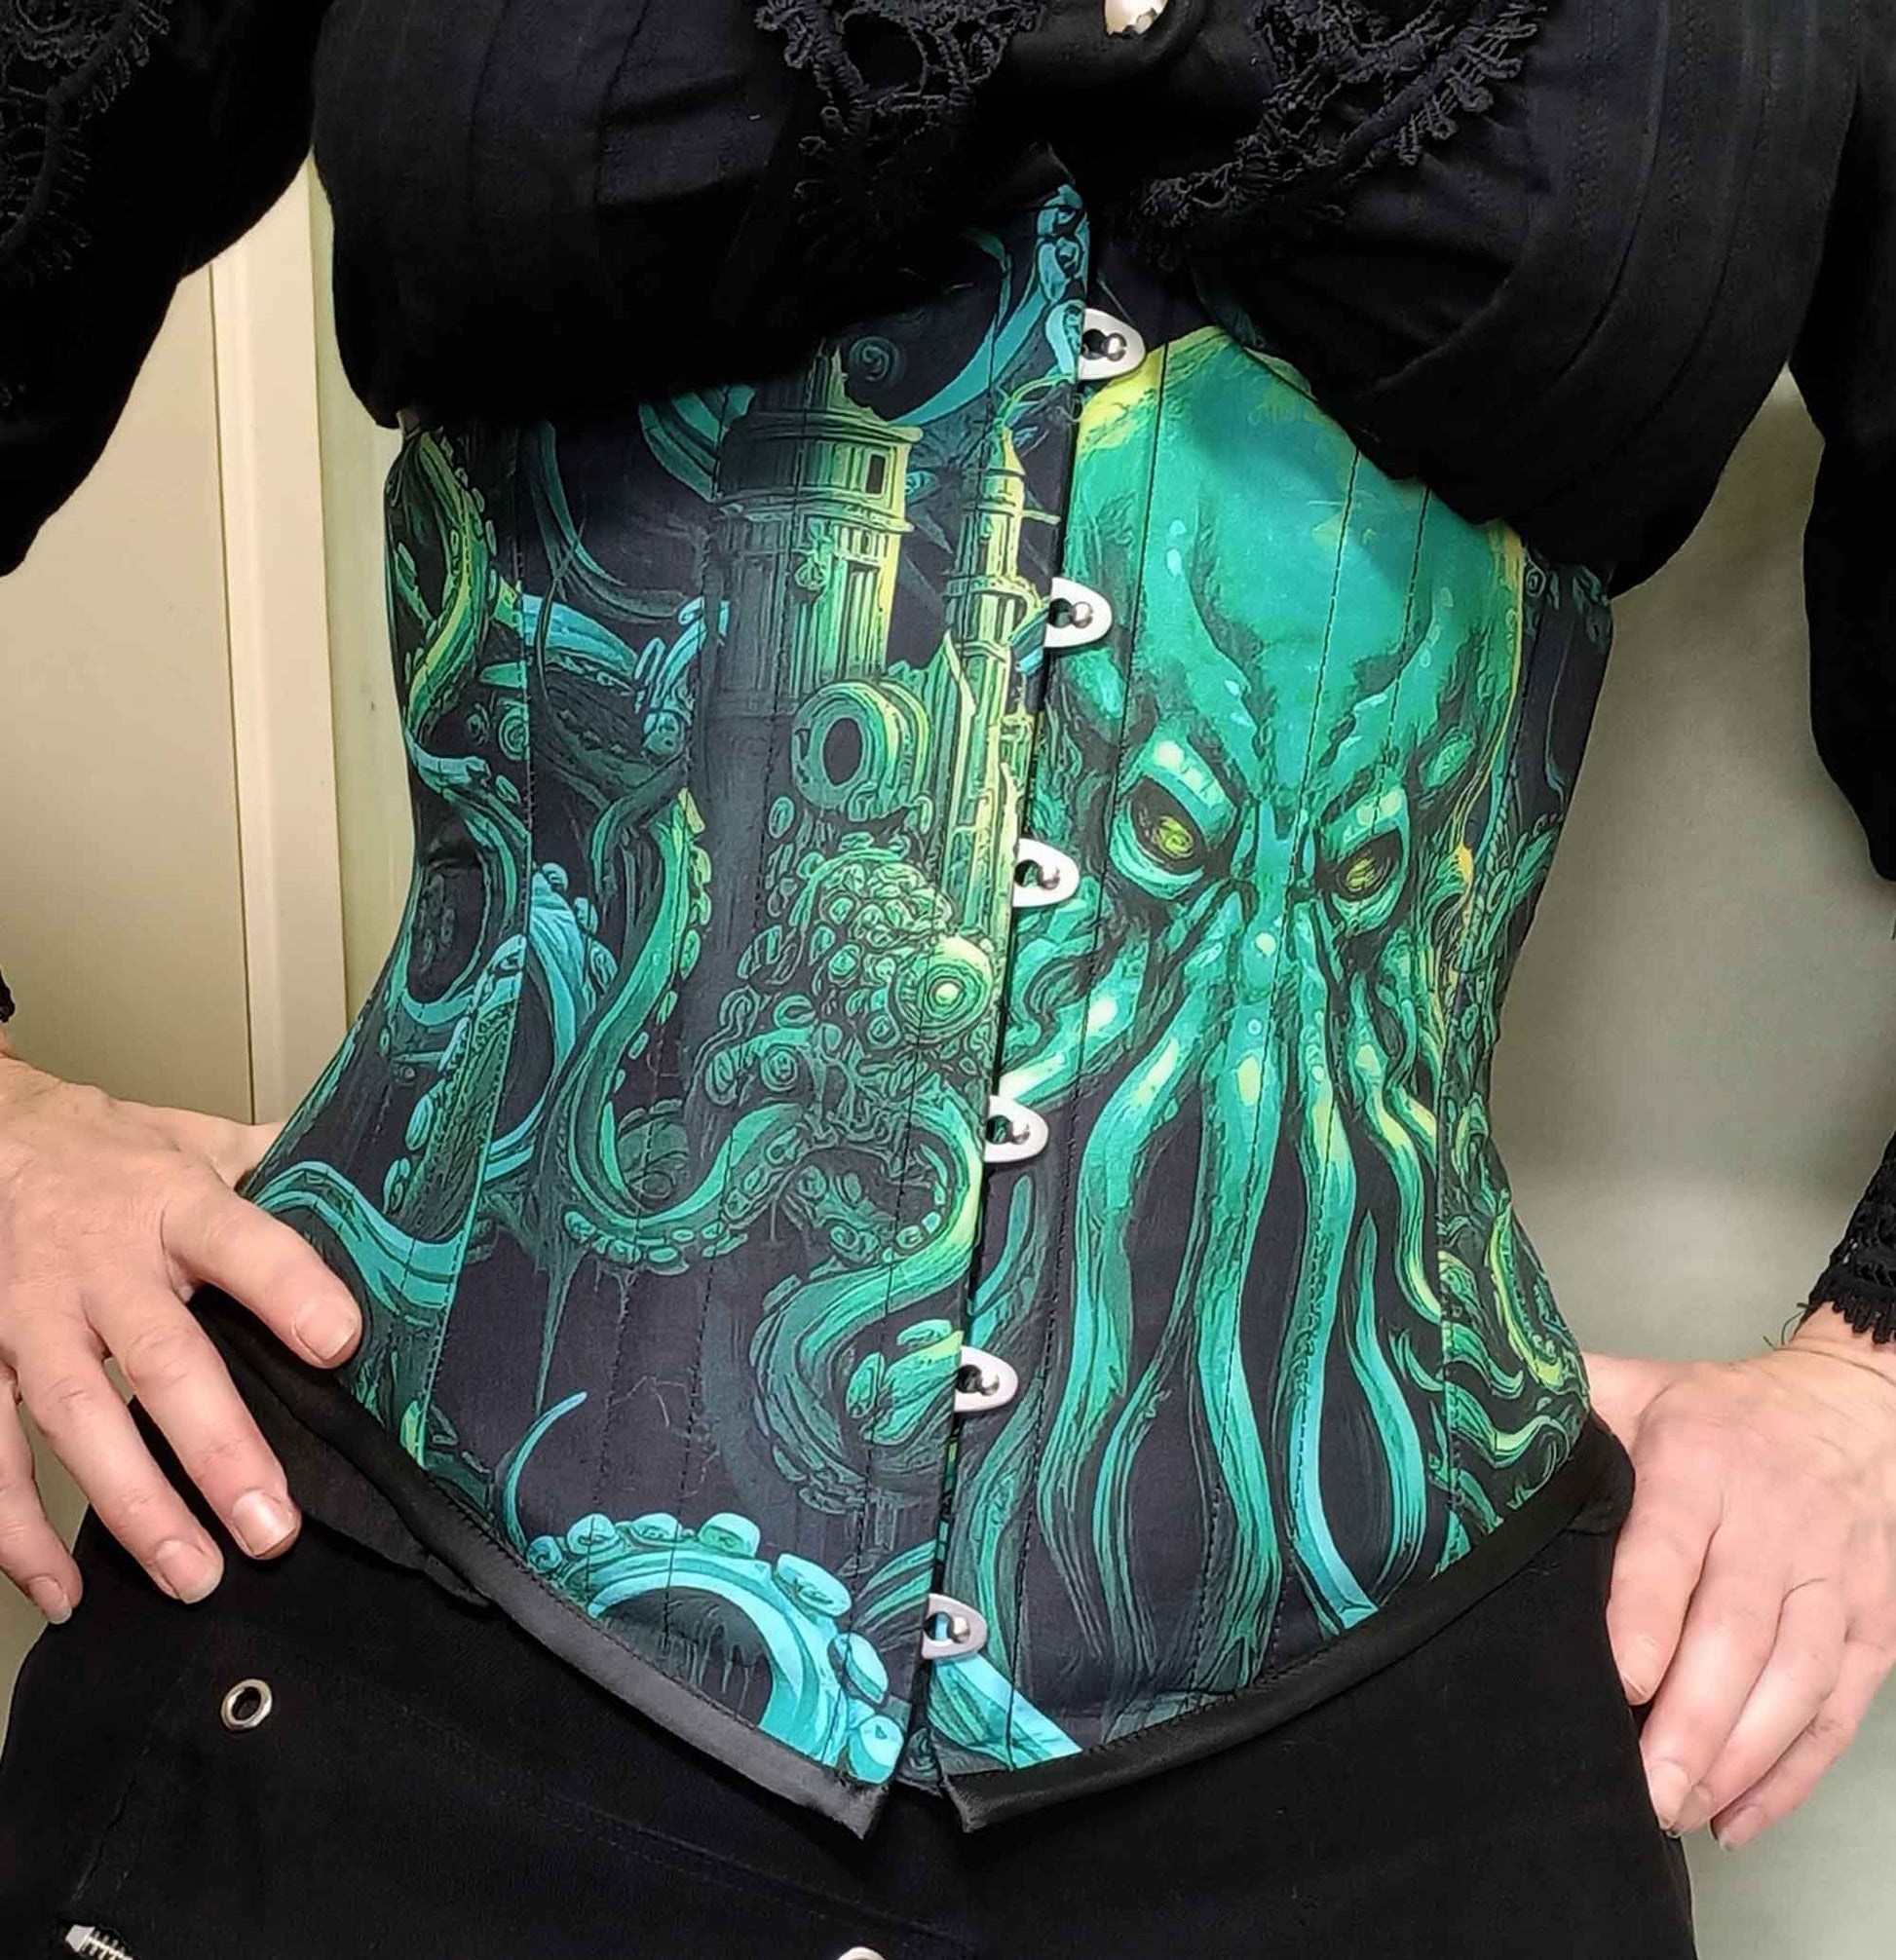 Call of Cthulhu under bust corset in vibrant and dark greens and blacks featuring the Lovecraft sea monster on an Australian made custom sized corset at Gallery Serpentine 2